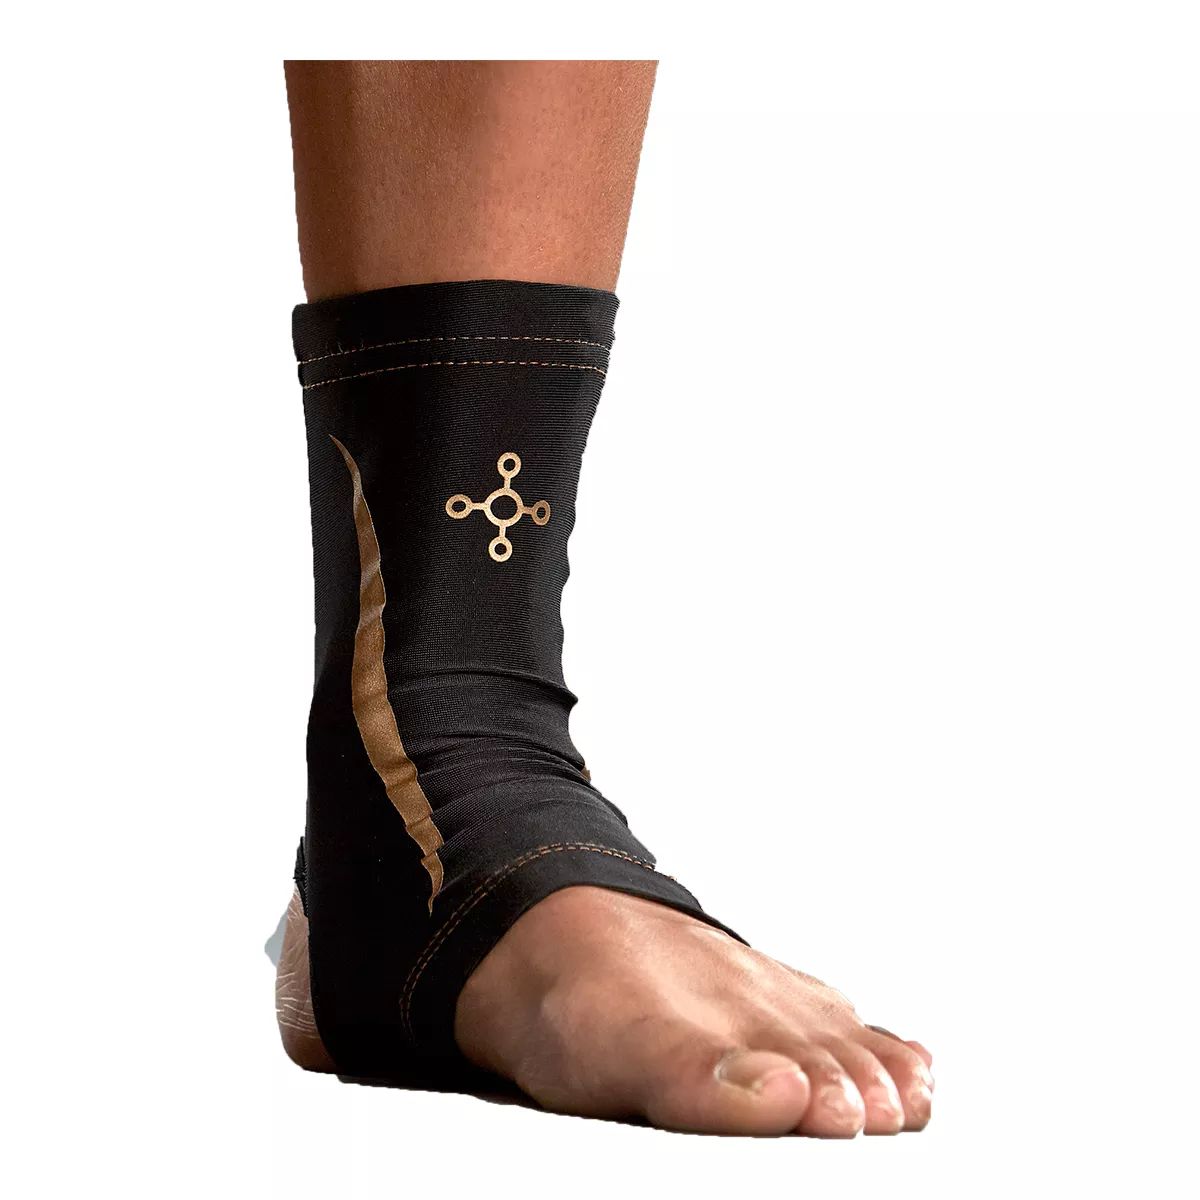 Tommie Copper - Unisex Compression Full Leg Sleeve - Black - Small :  : Clothing & Accessories